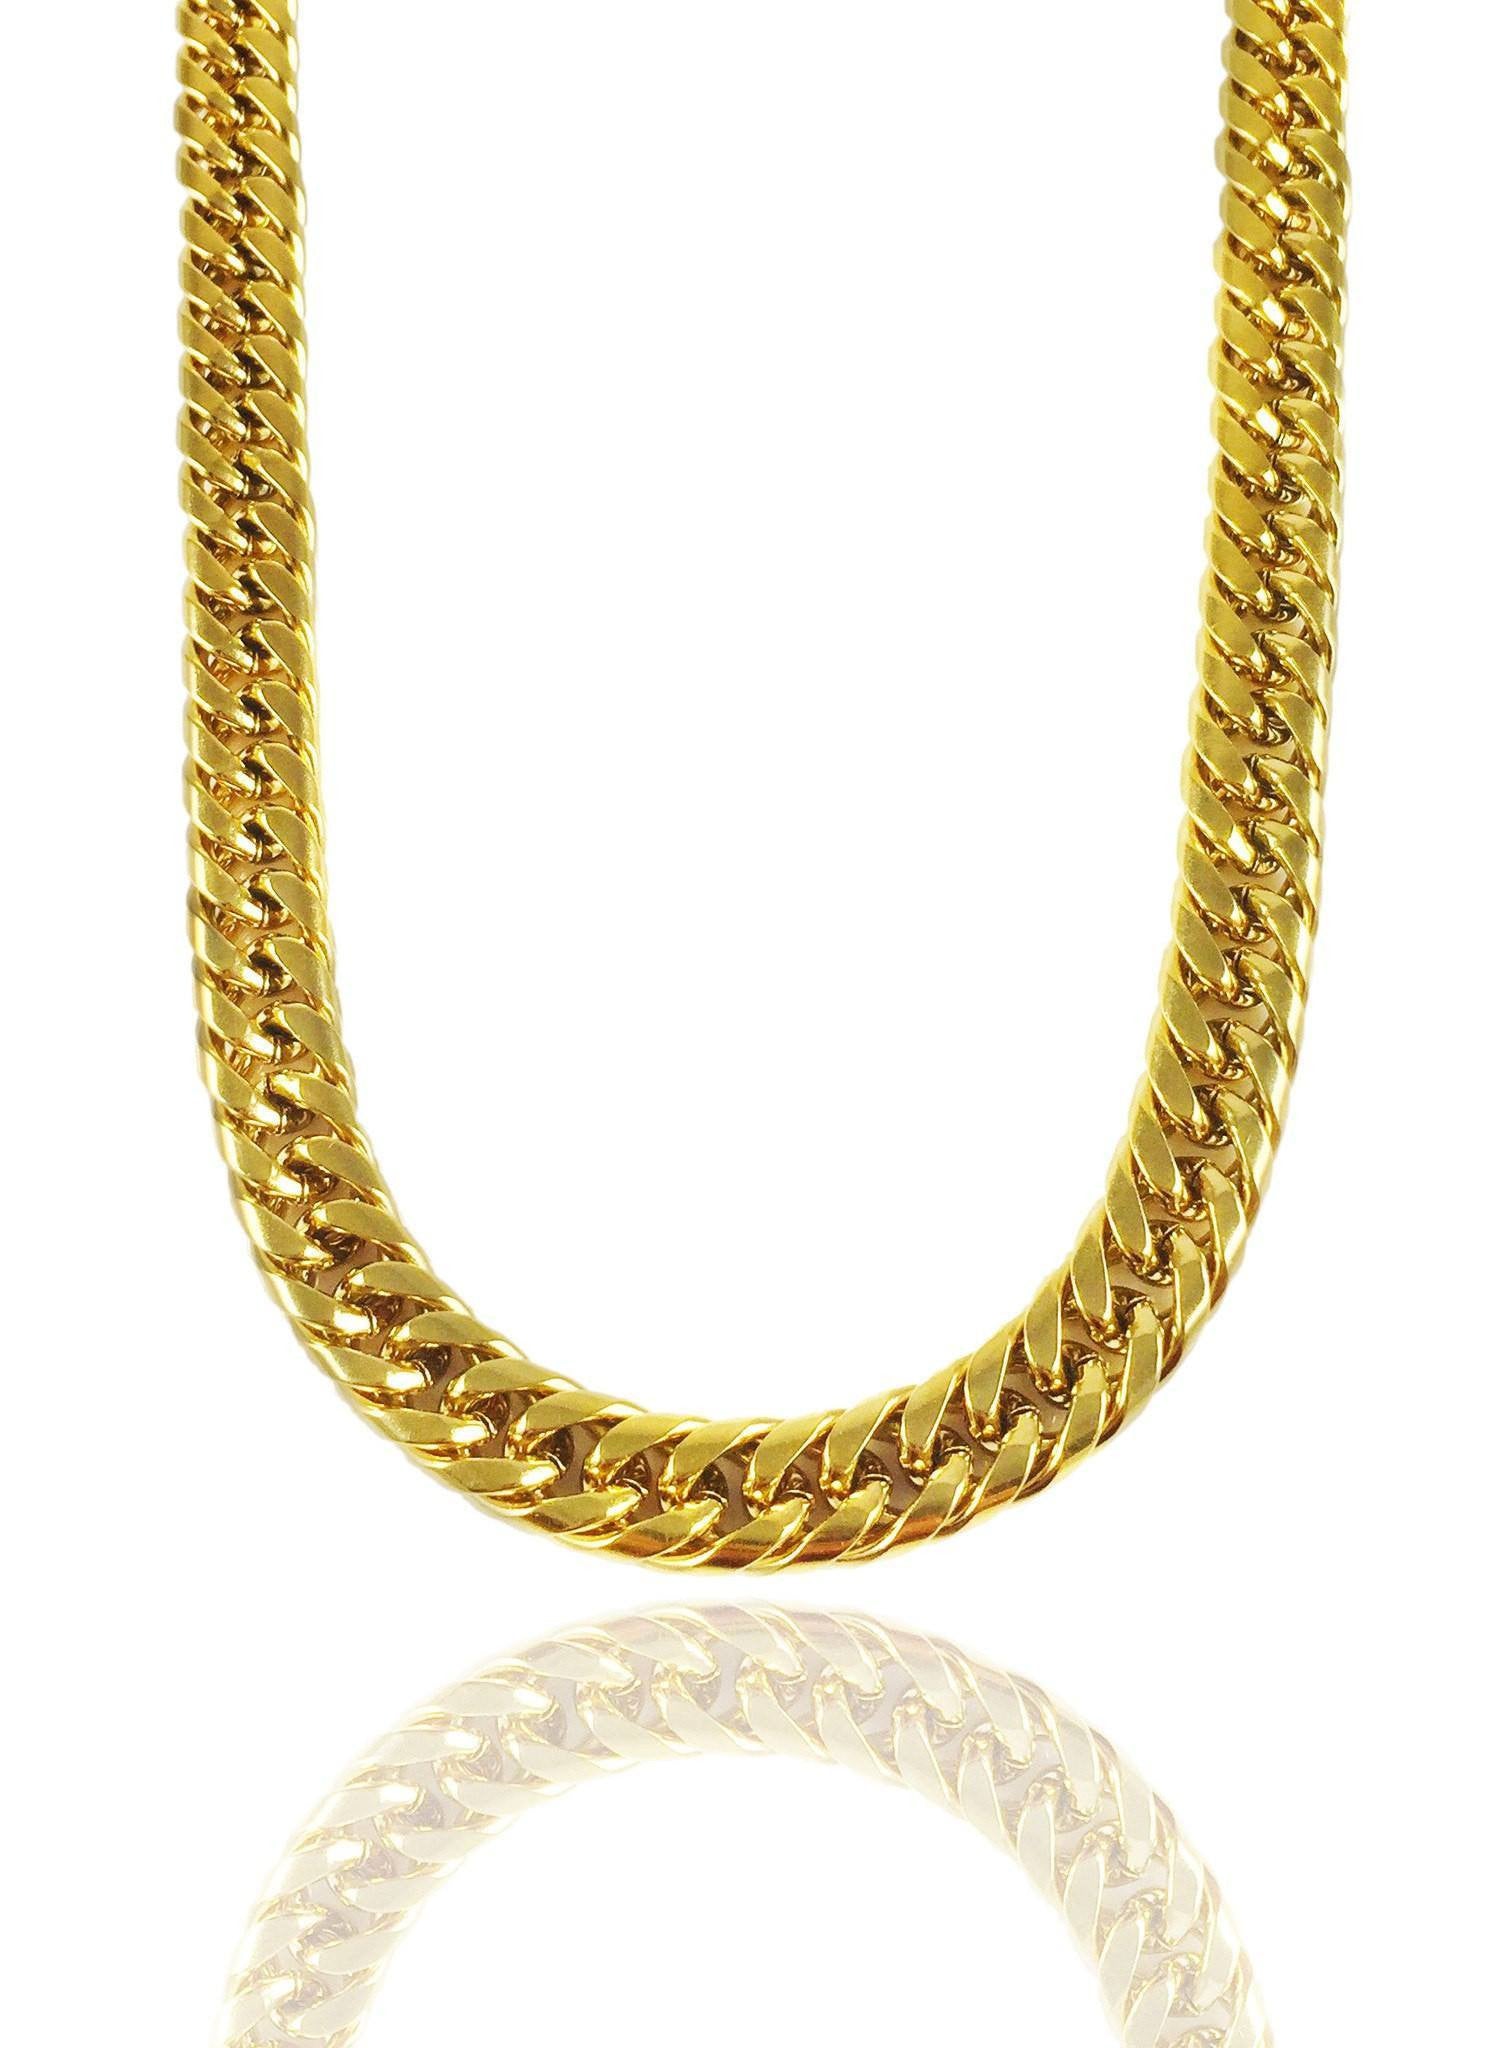 Necklace - The Cuban Link Chain X 18k Gold